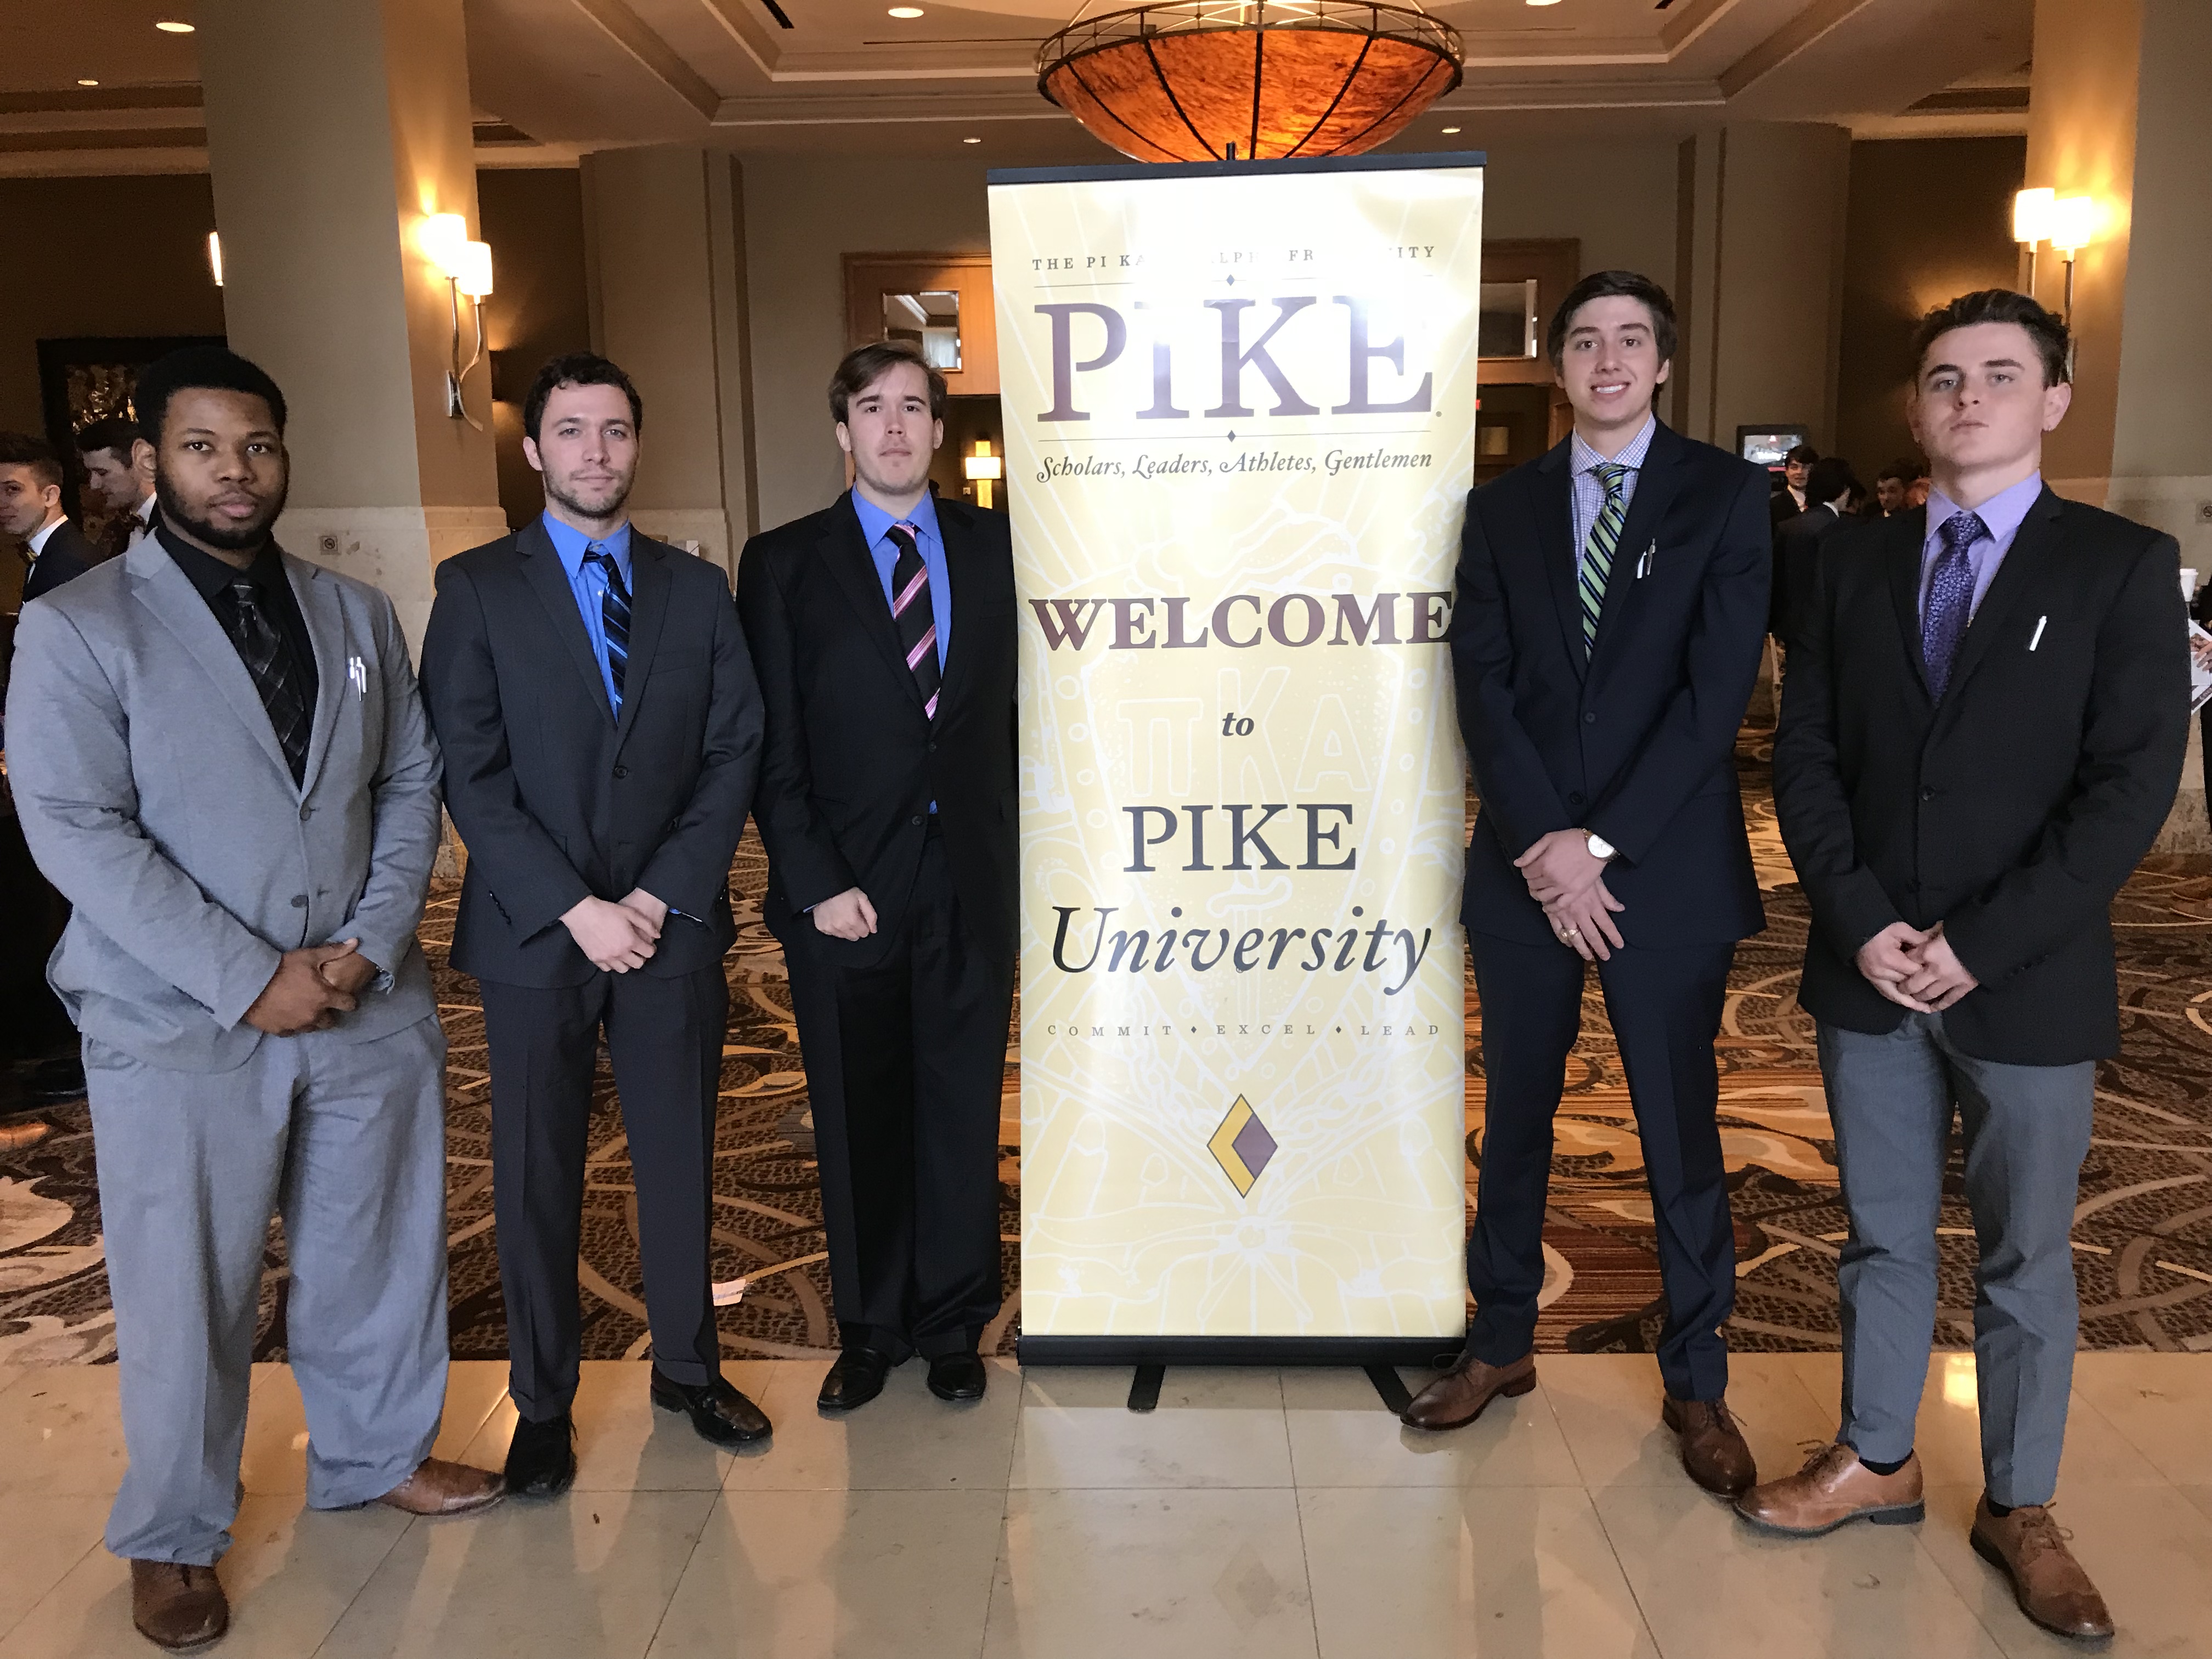 5 men in suites standing next to a sign that welcomes them to Pike University.